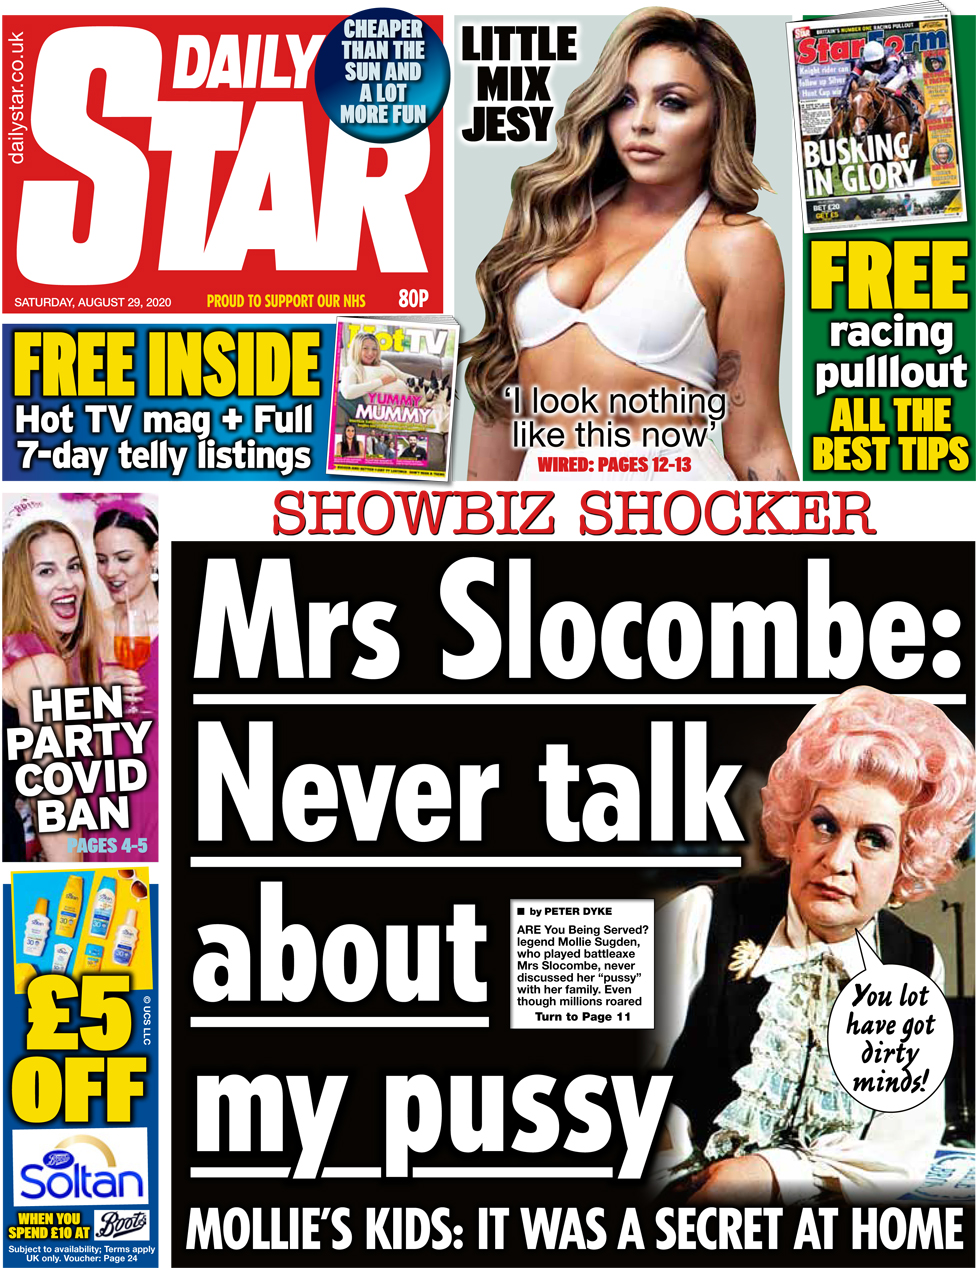 The Daily Star front page 29 August 2021